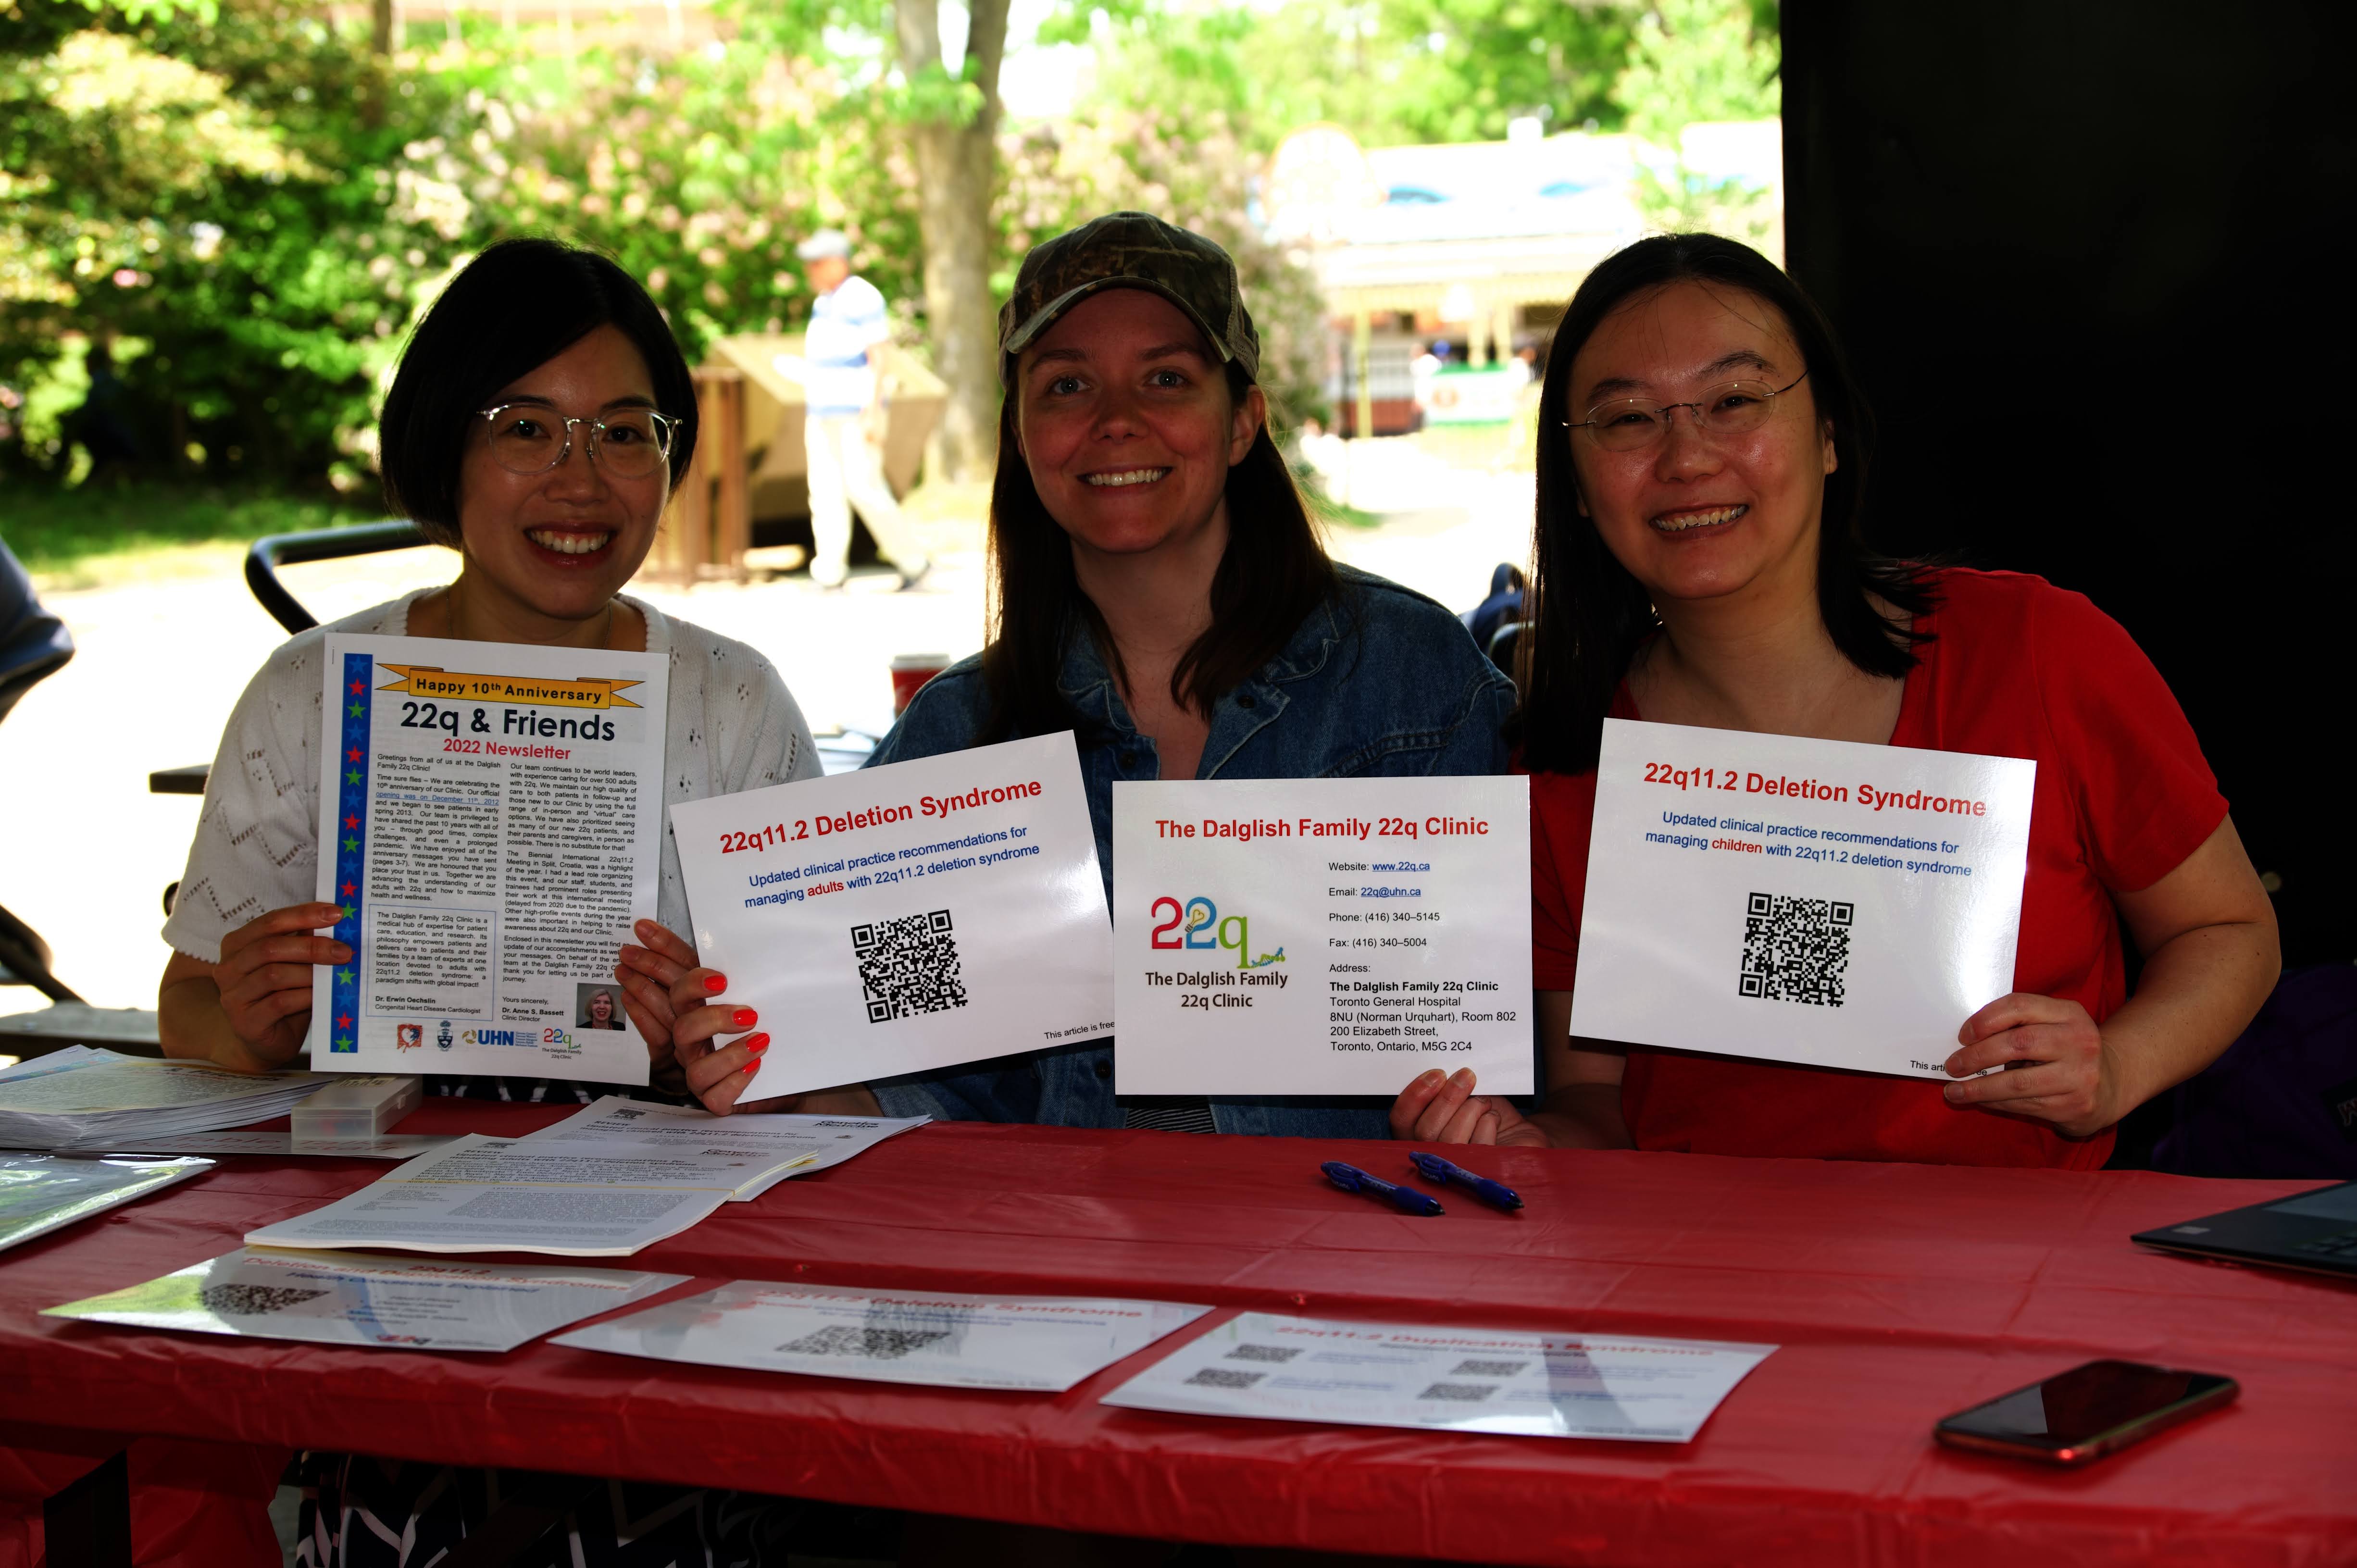 Tracy Heung (Clinical Research Analyst), Samantha D'Arcy (Registered Dietitian), and Joanne Loo (Education and Communication Officer) at our Resource Table.